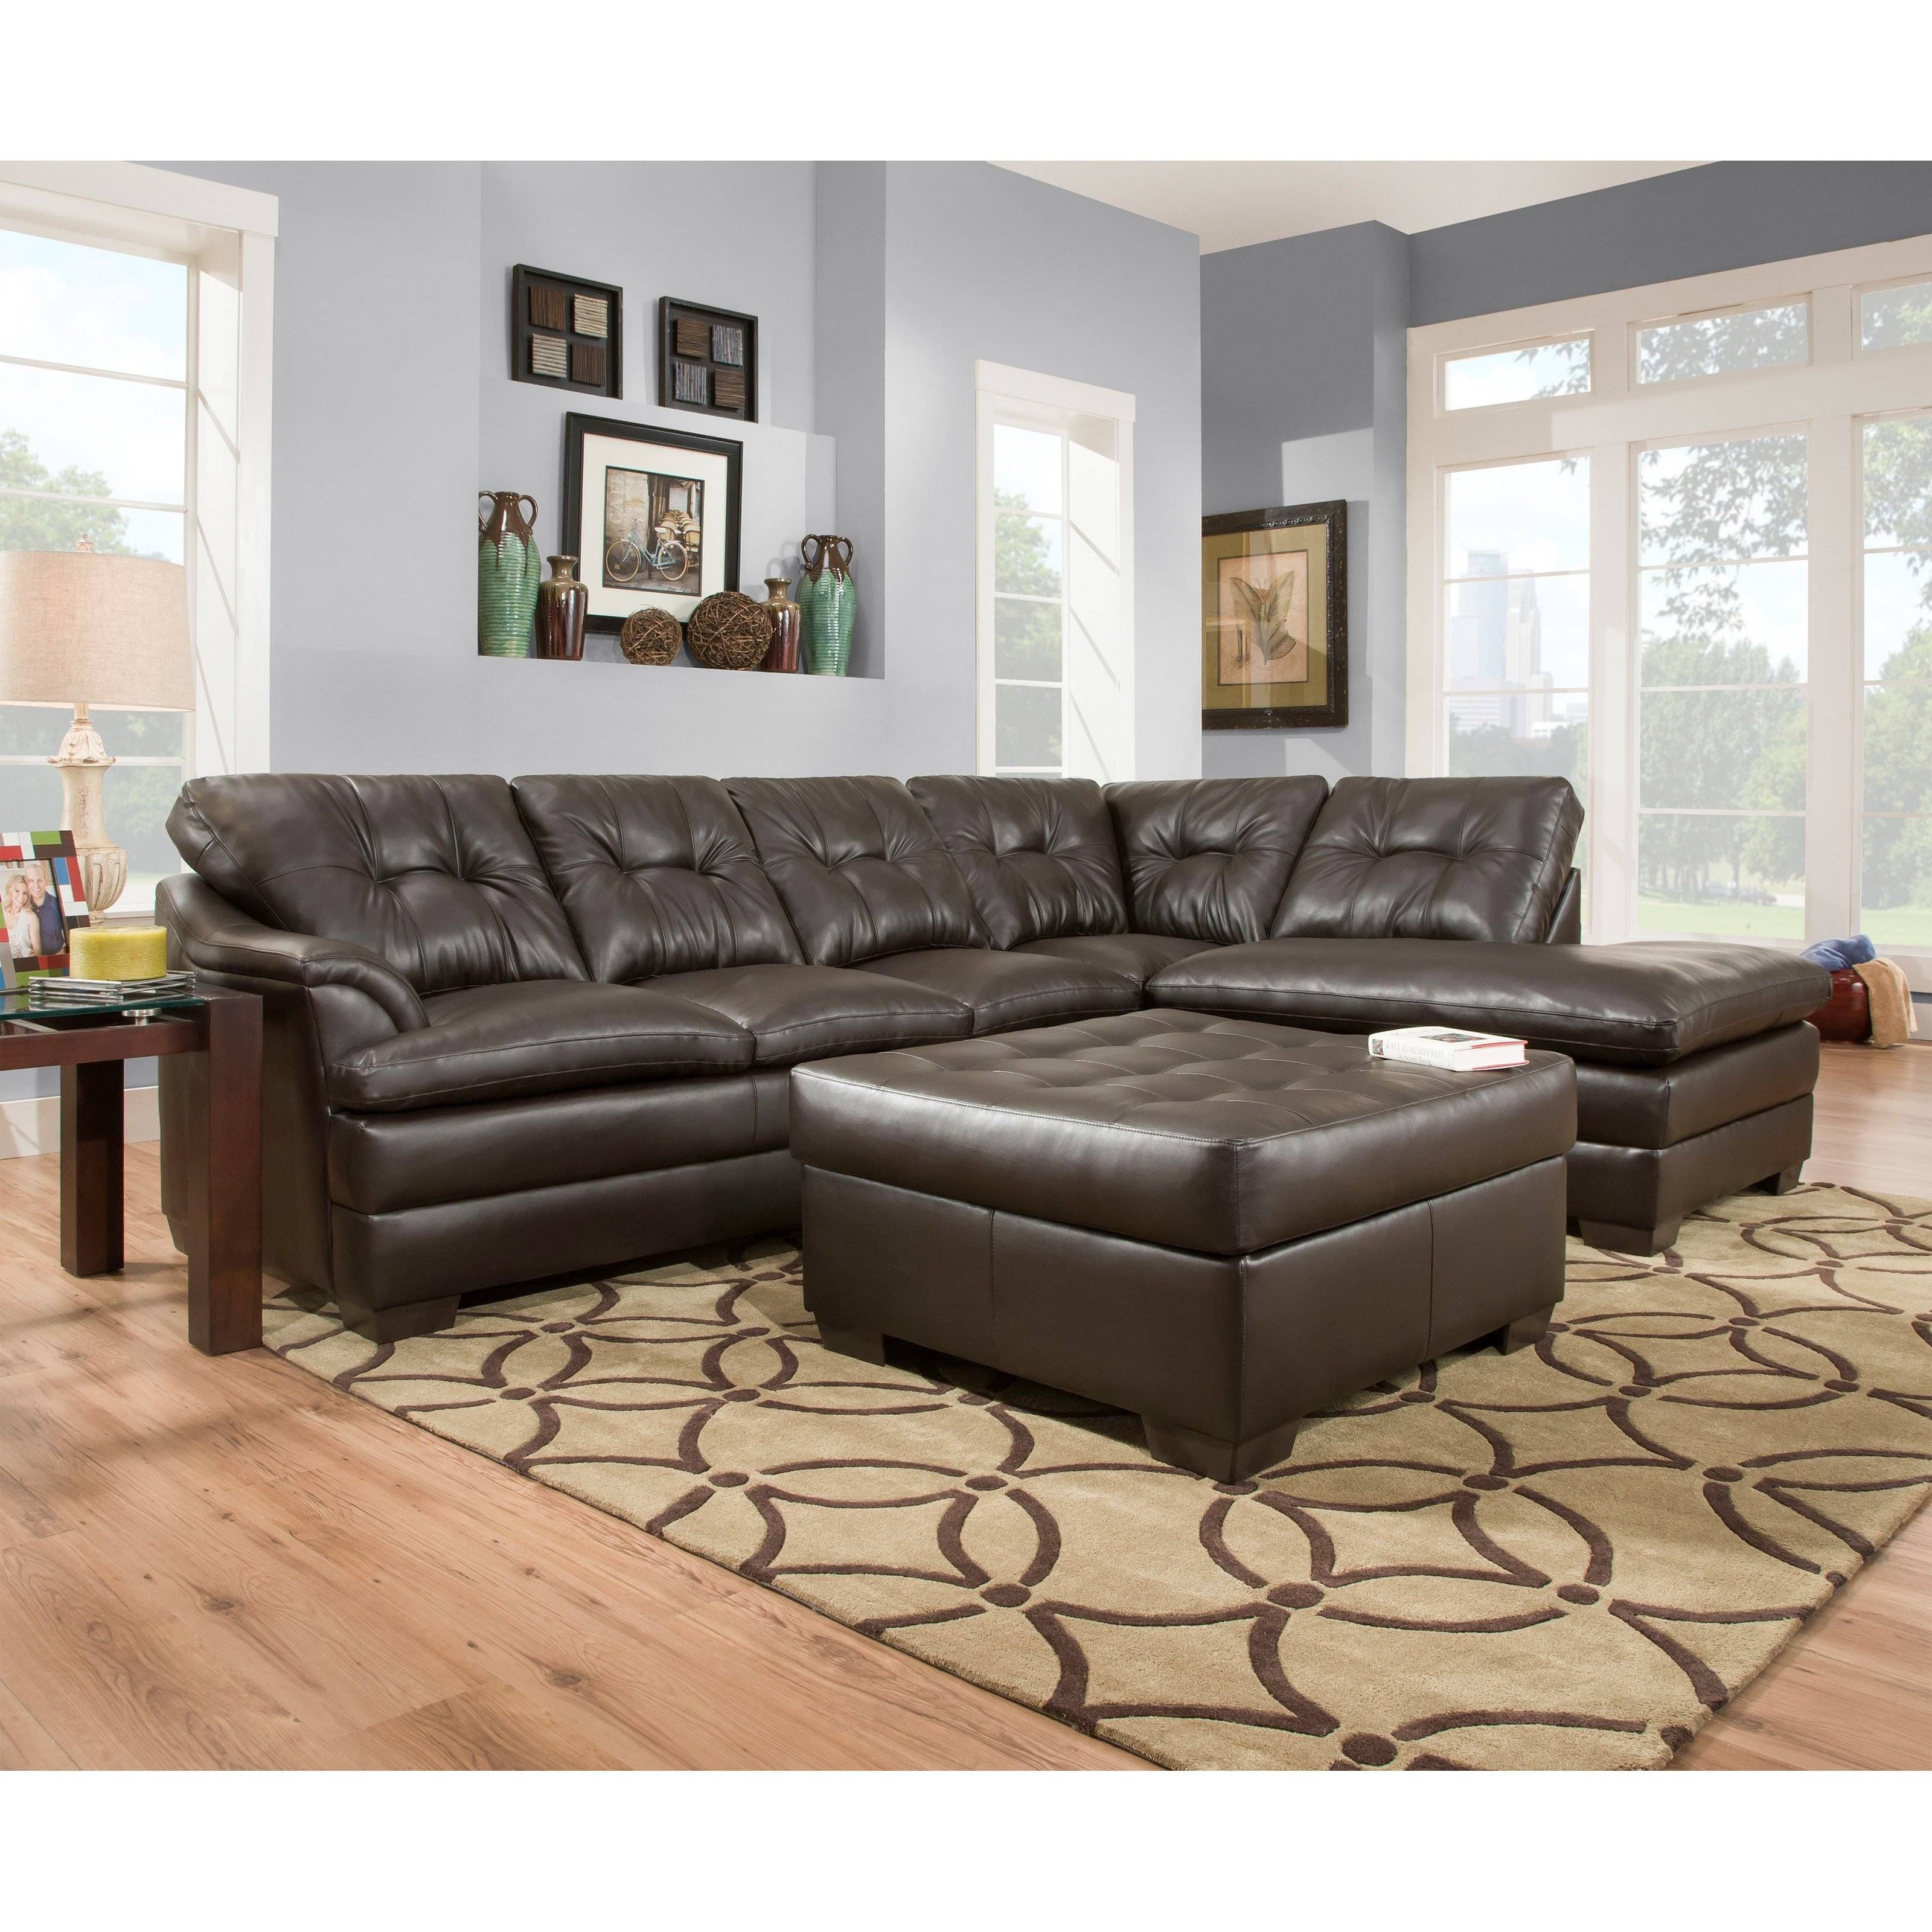 Simmons Upholstery Apollo Sectional With Optional Ottoman | Hayneedle With Simmons Sectional Sofas (Photo 7 of 30)